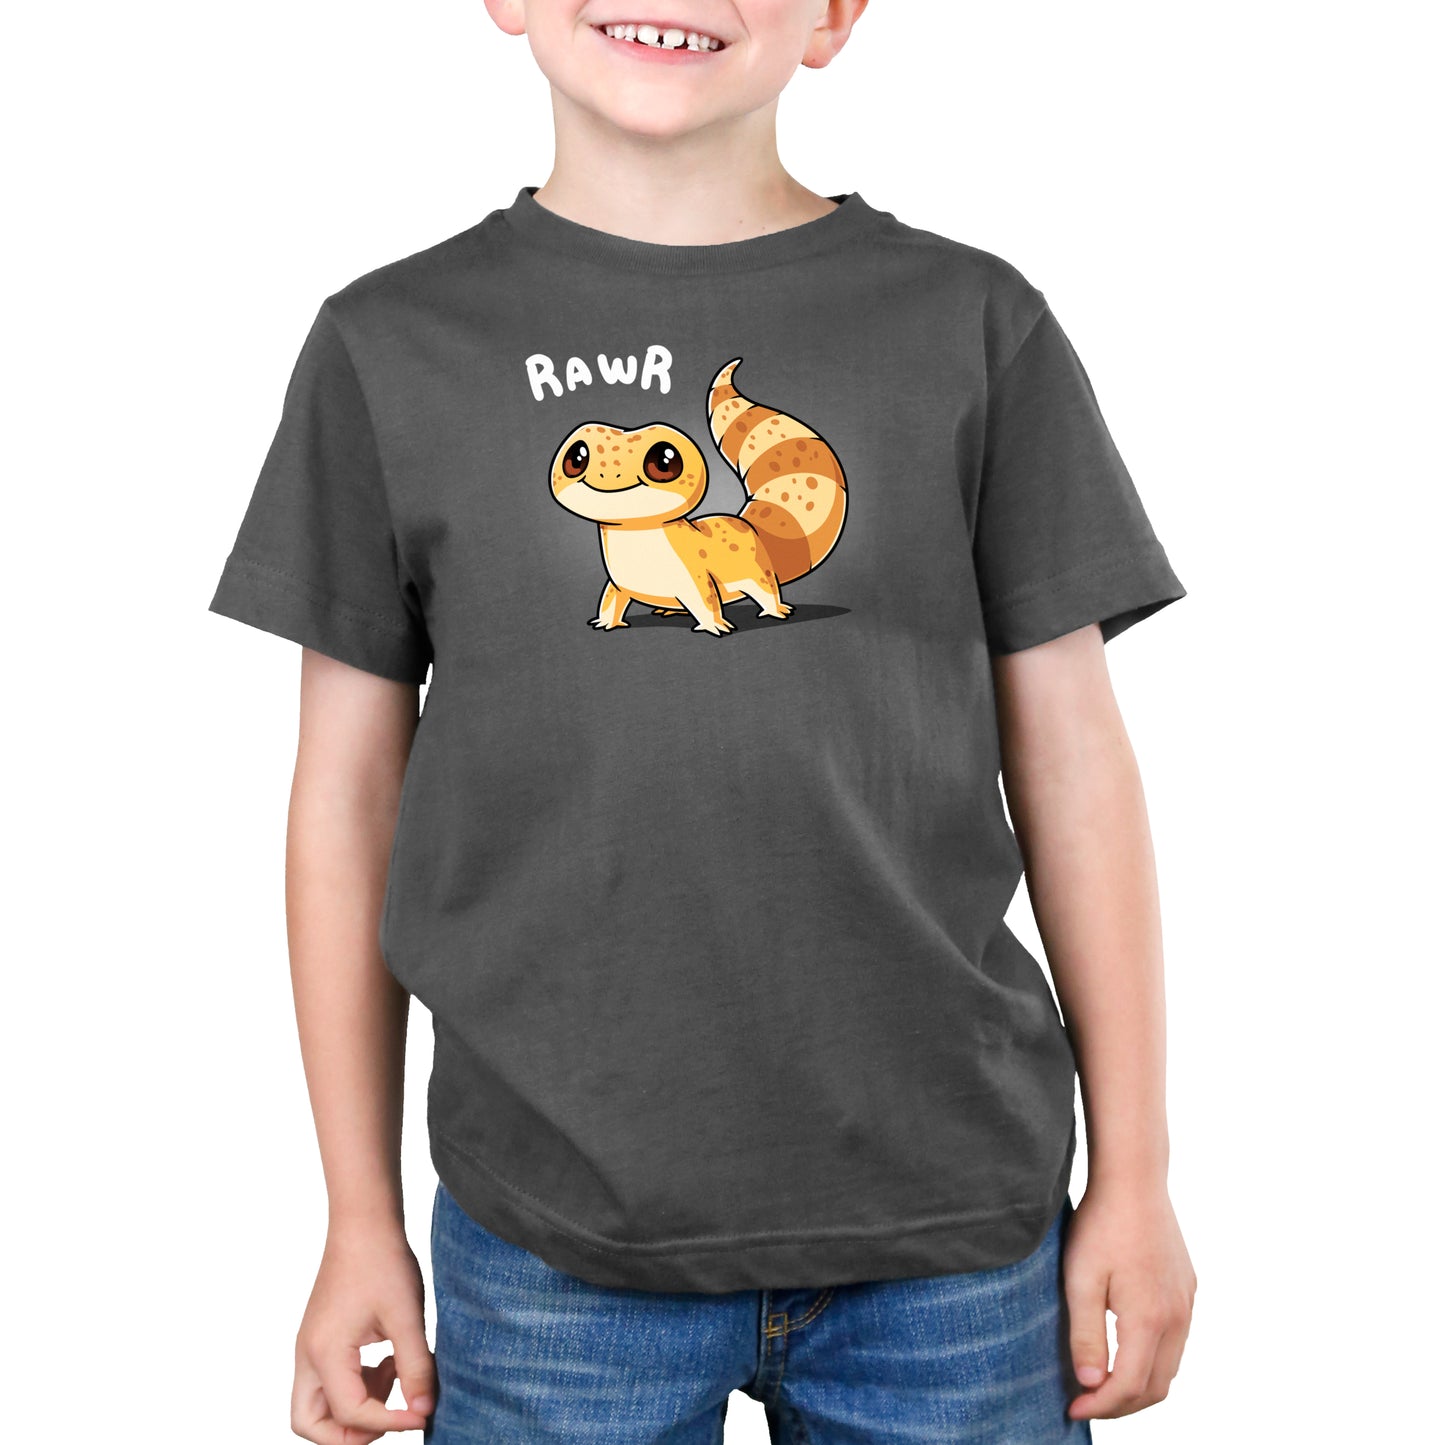 A young boy wearing a Tiny Dino t-shirt from TeeTurtle.